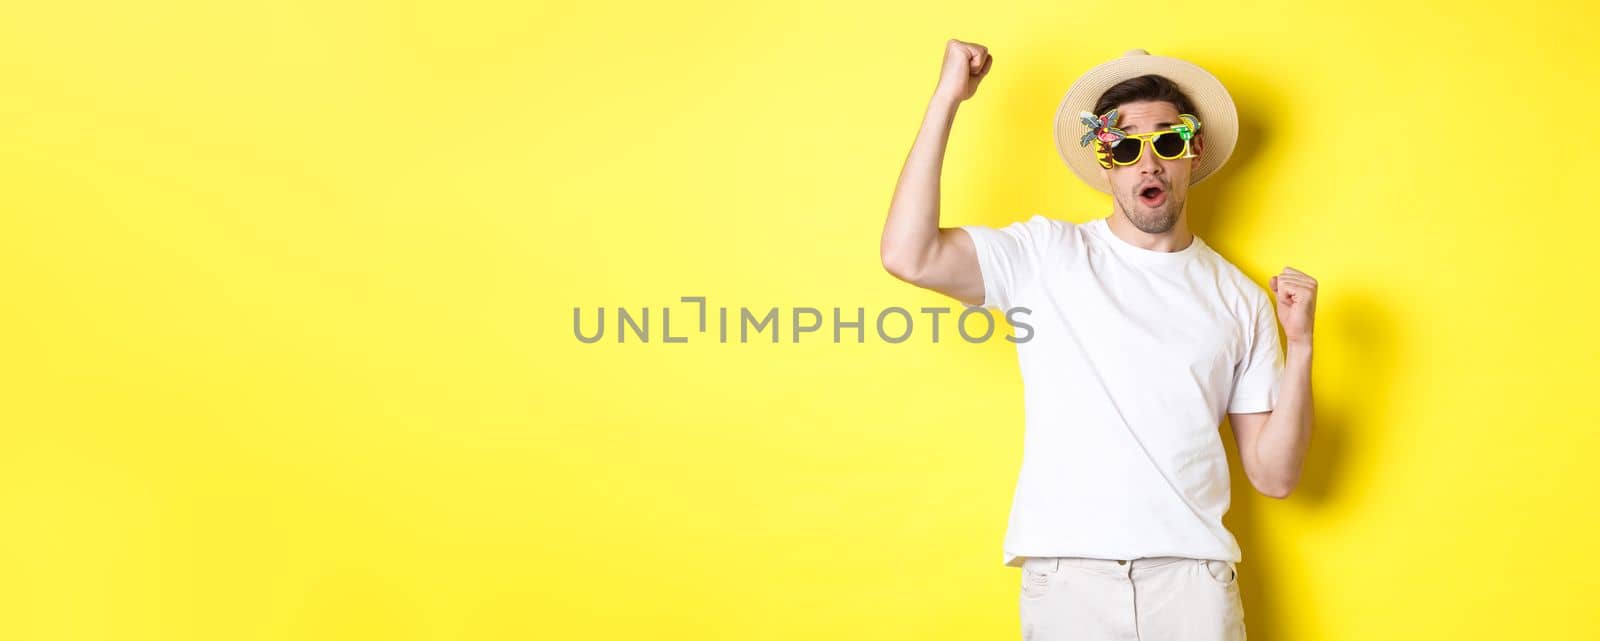 Concept of tourism and lifestyle. Happy guy tourist enjoying trip, rooting for you, fist pump and triumphing, going on journey in summer hat and sunglasses, yellow background.